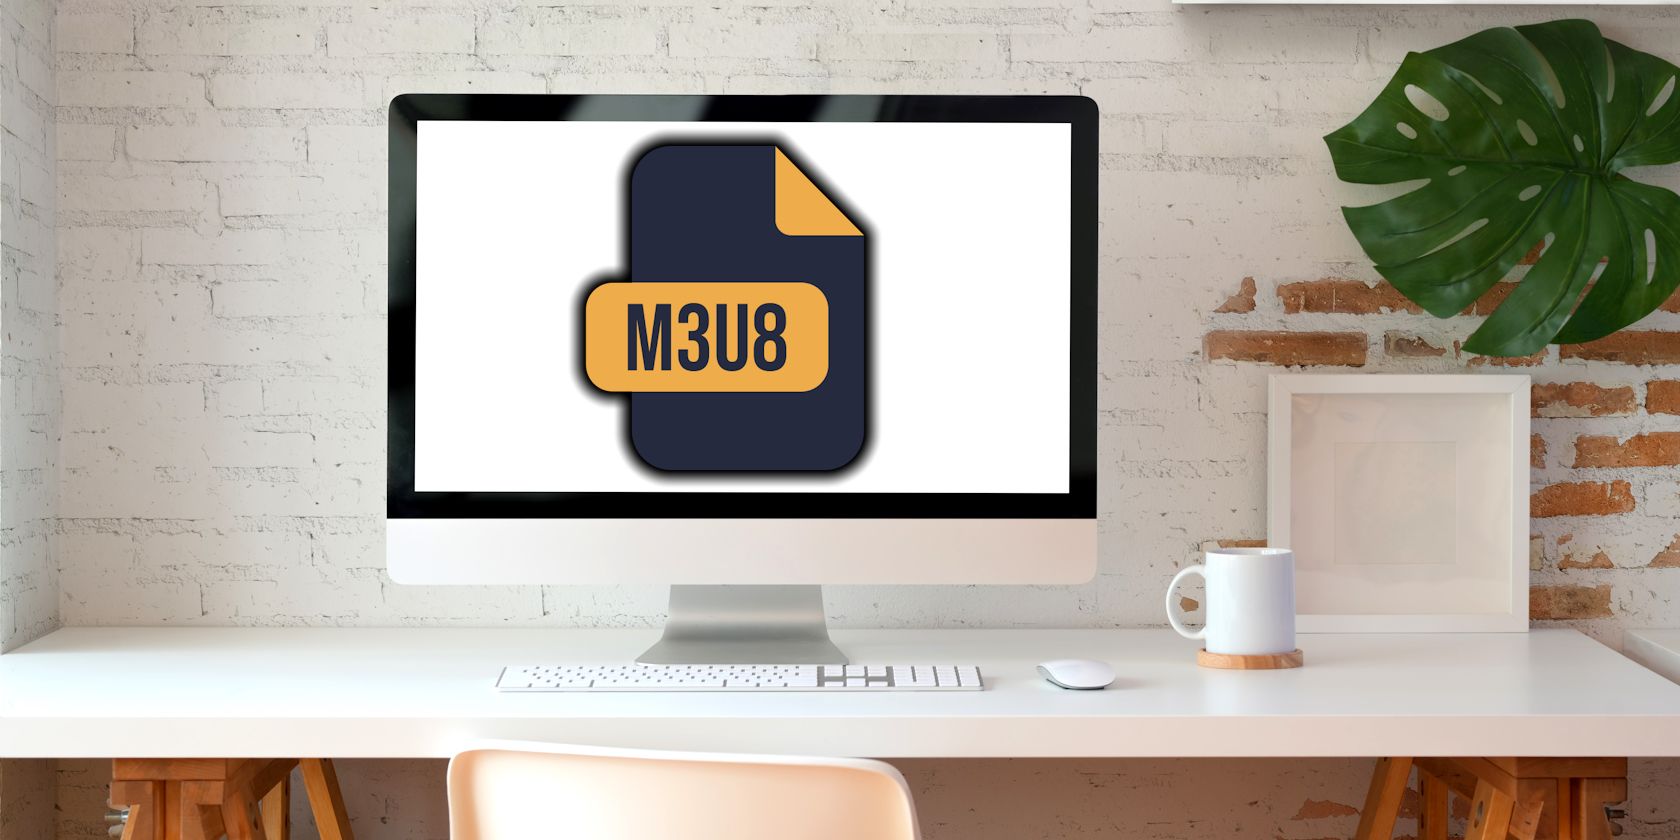 What Is an M3U8 File? How to Open It